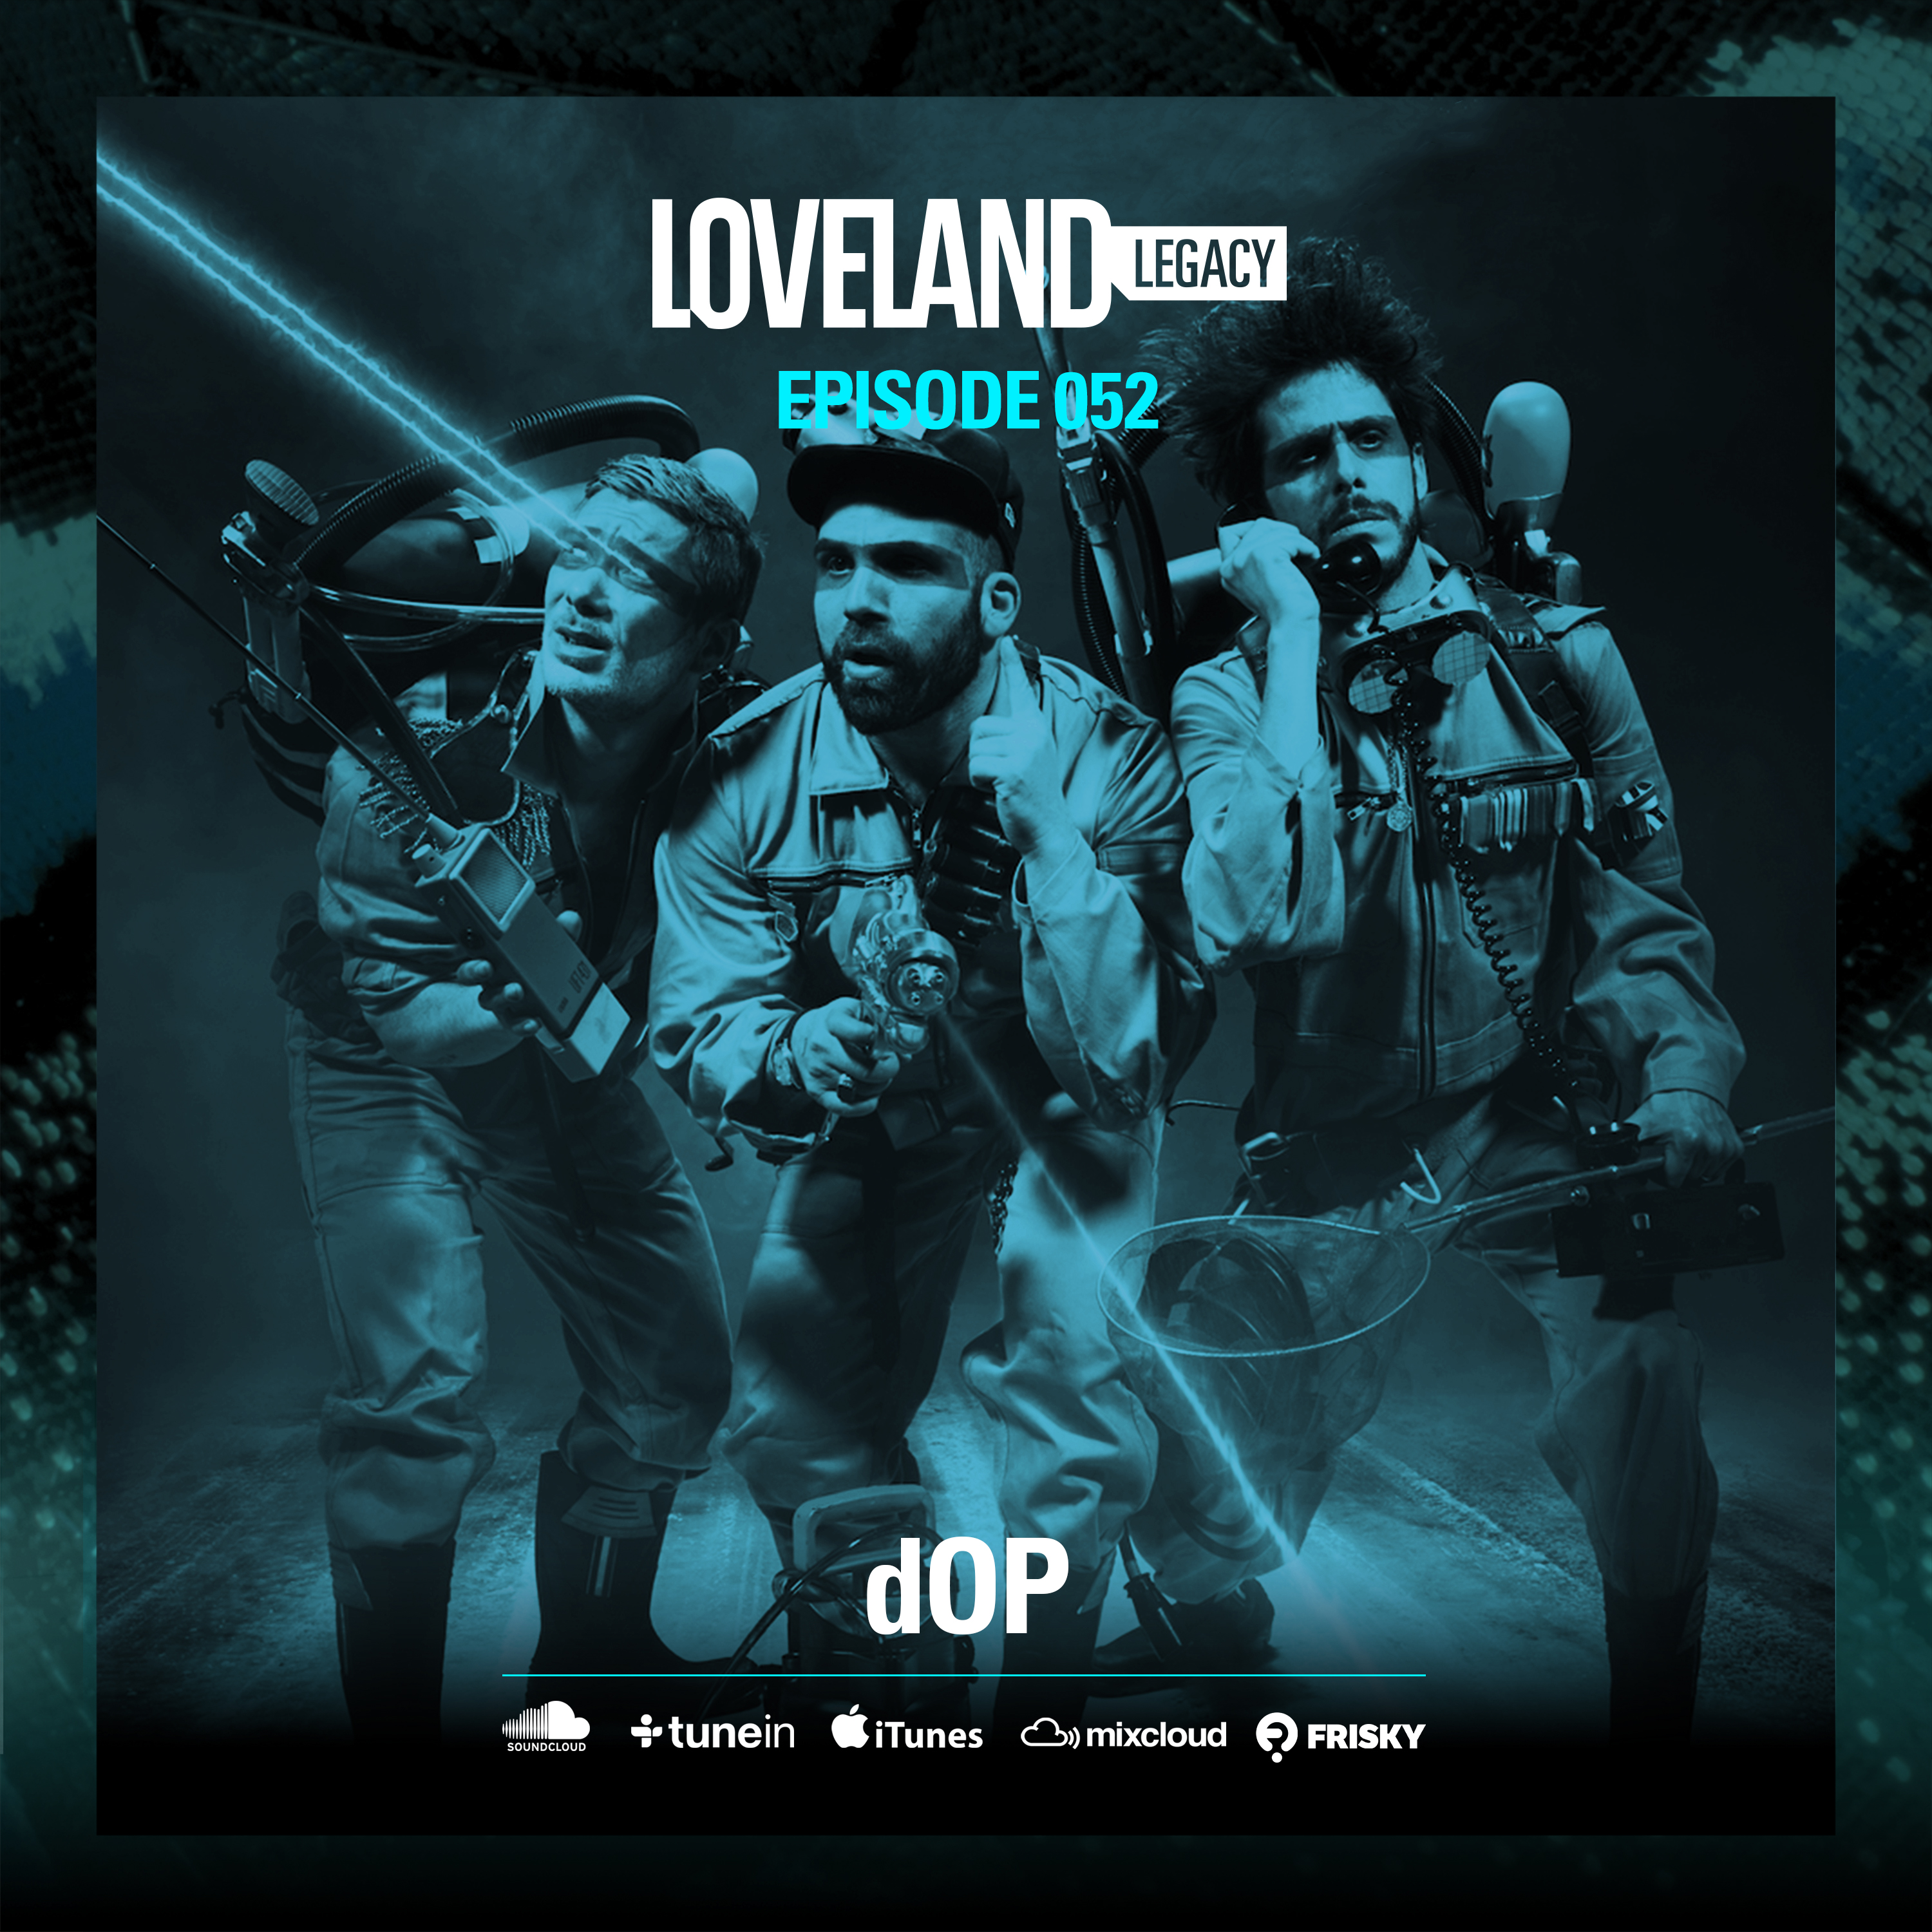 dOP's live set is the epitome of how electronic music can be performed live. The three hyper-talented artists joined us in Barcelona for Loveland Live with an impressive live setup resulting in a brilliant set. See you at: 31/12 Loveland New Year 2016 | bit.ly/LovelandNewYear2016 01/01 Loveland Live 2017 | bit.ly/LovelandLive2017